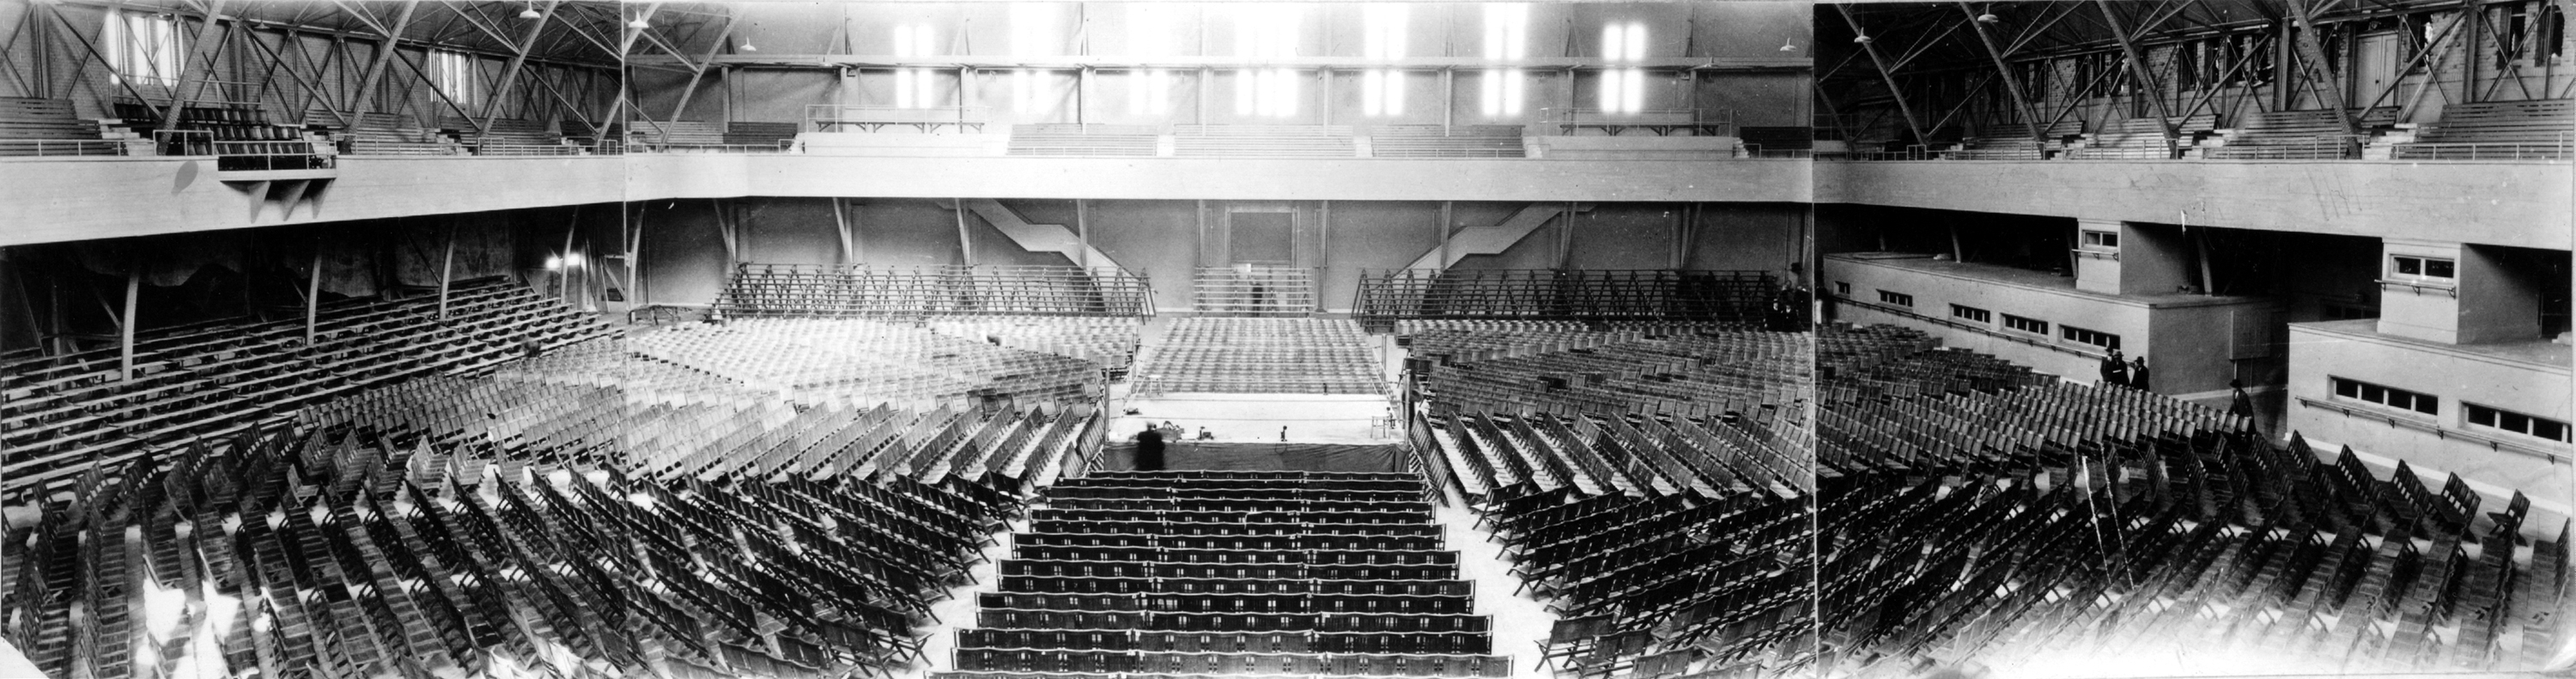 SF Armory Boxing Ring